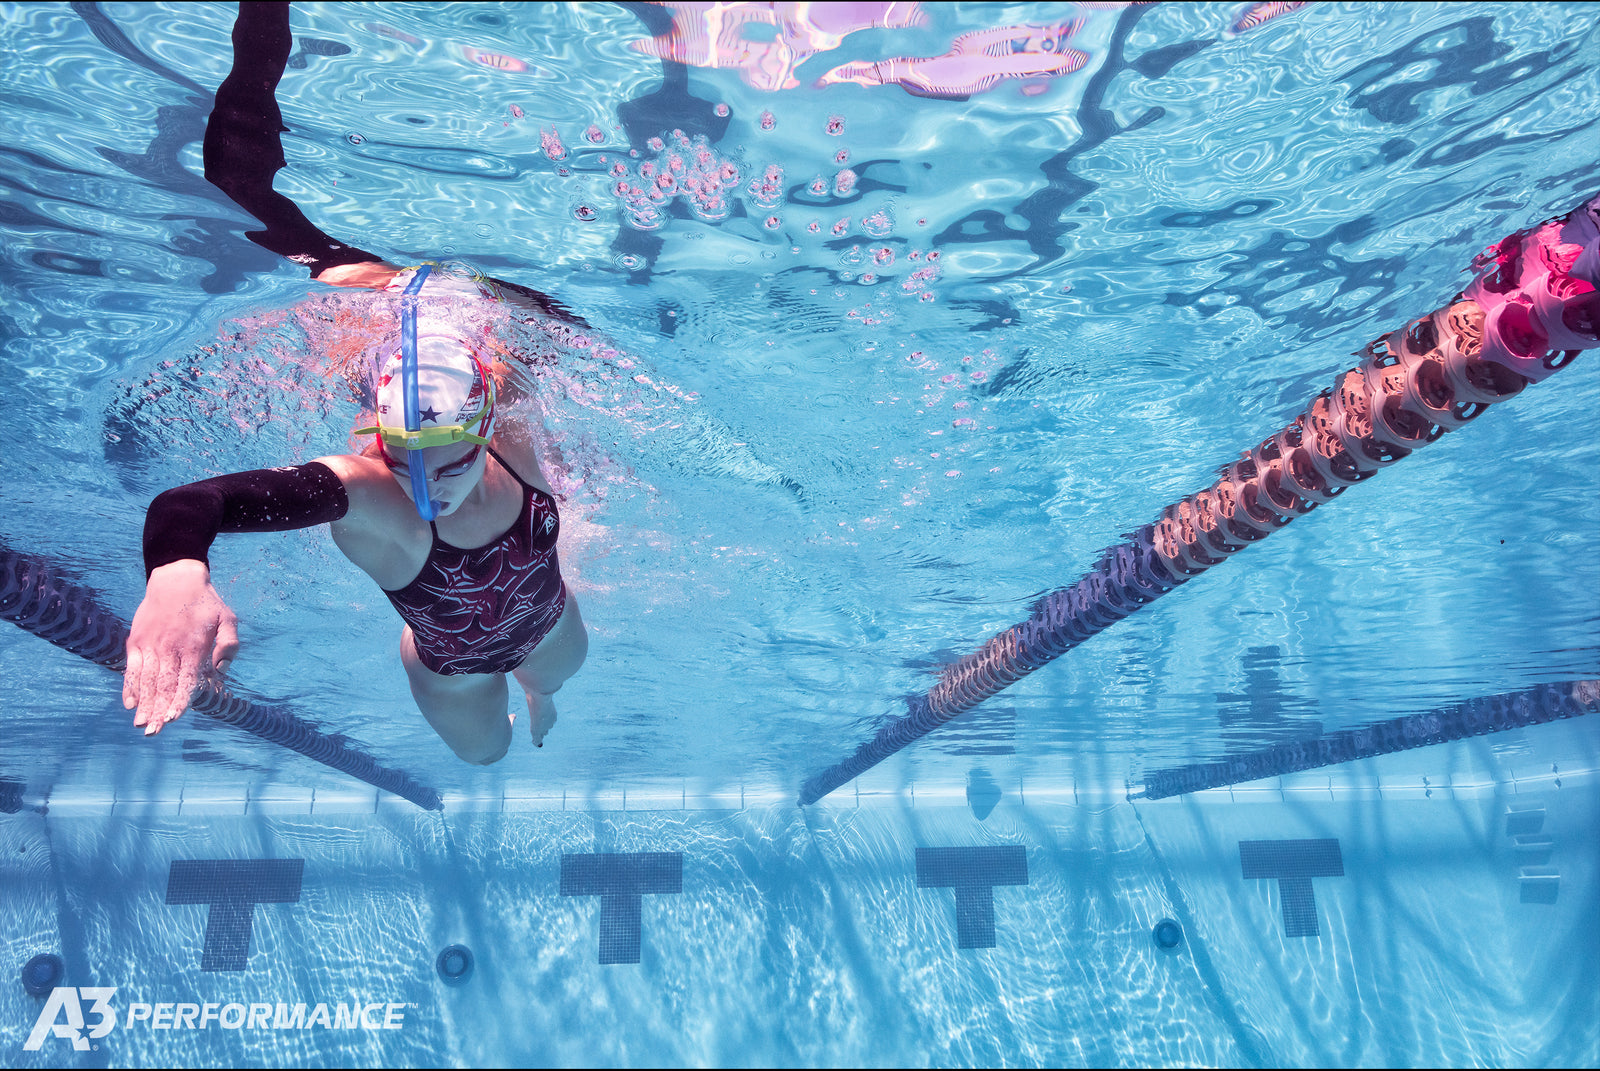 Three Advanced Drills for Perfecting Your Stroke